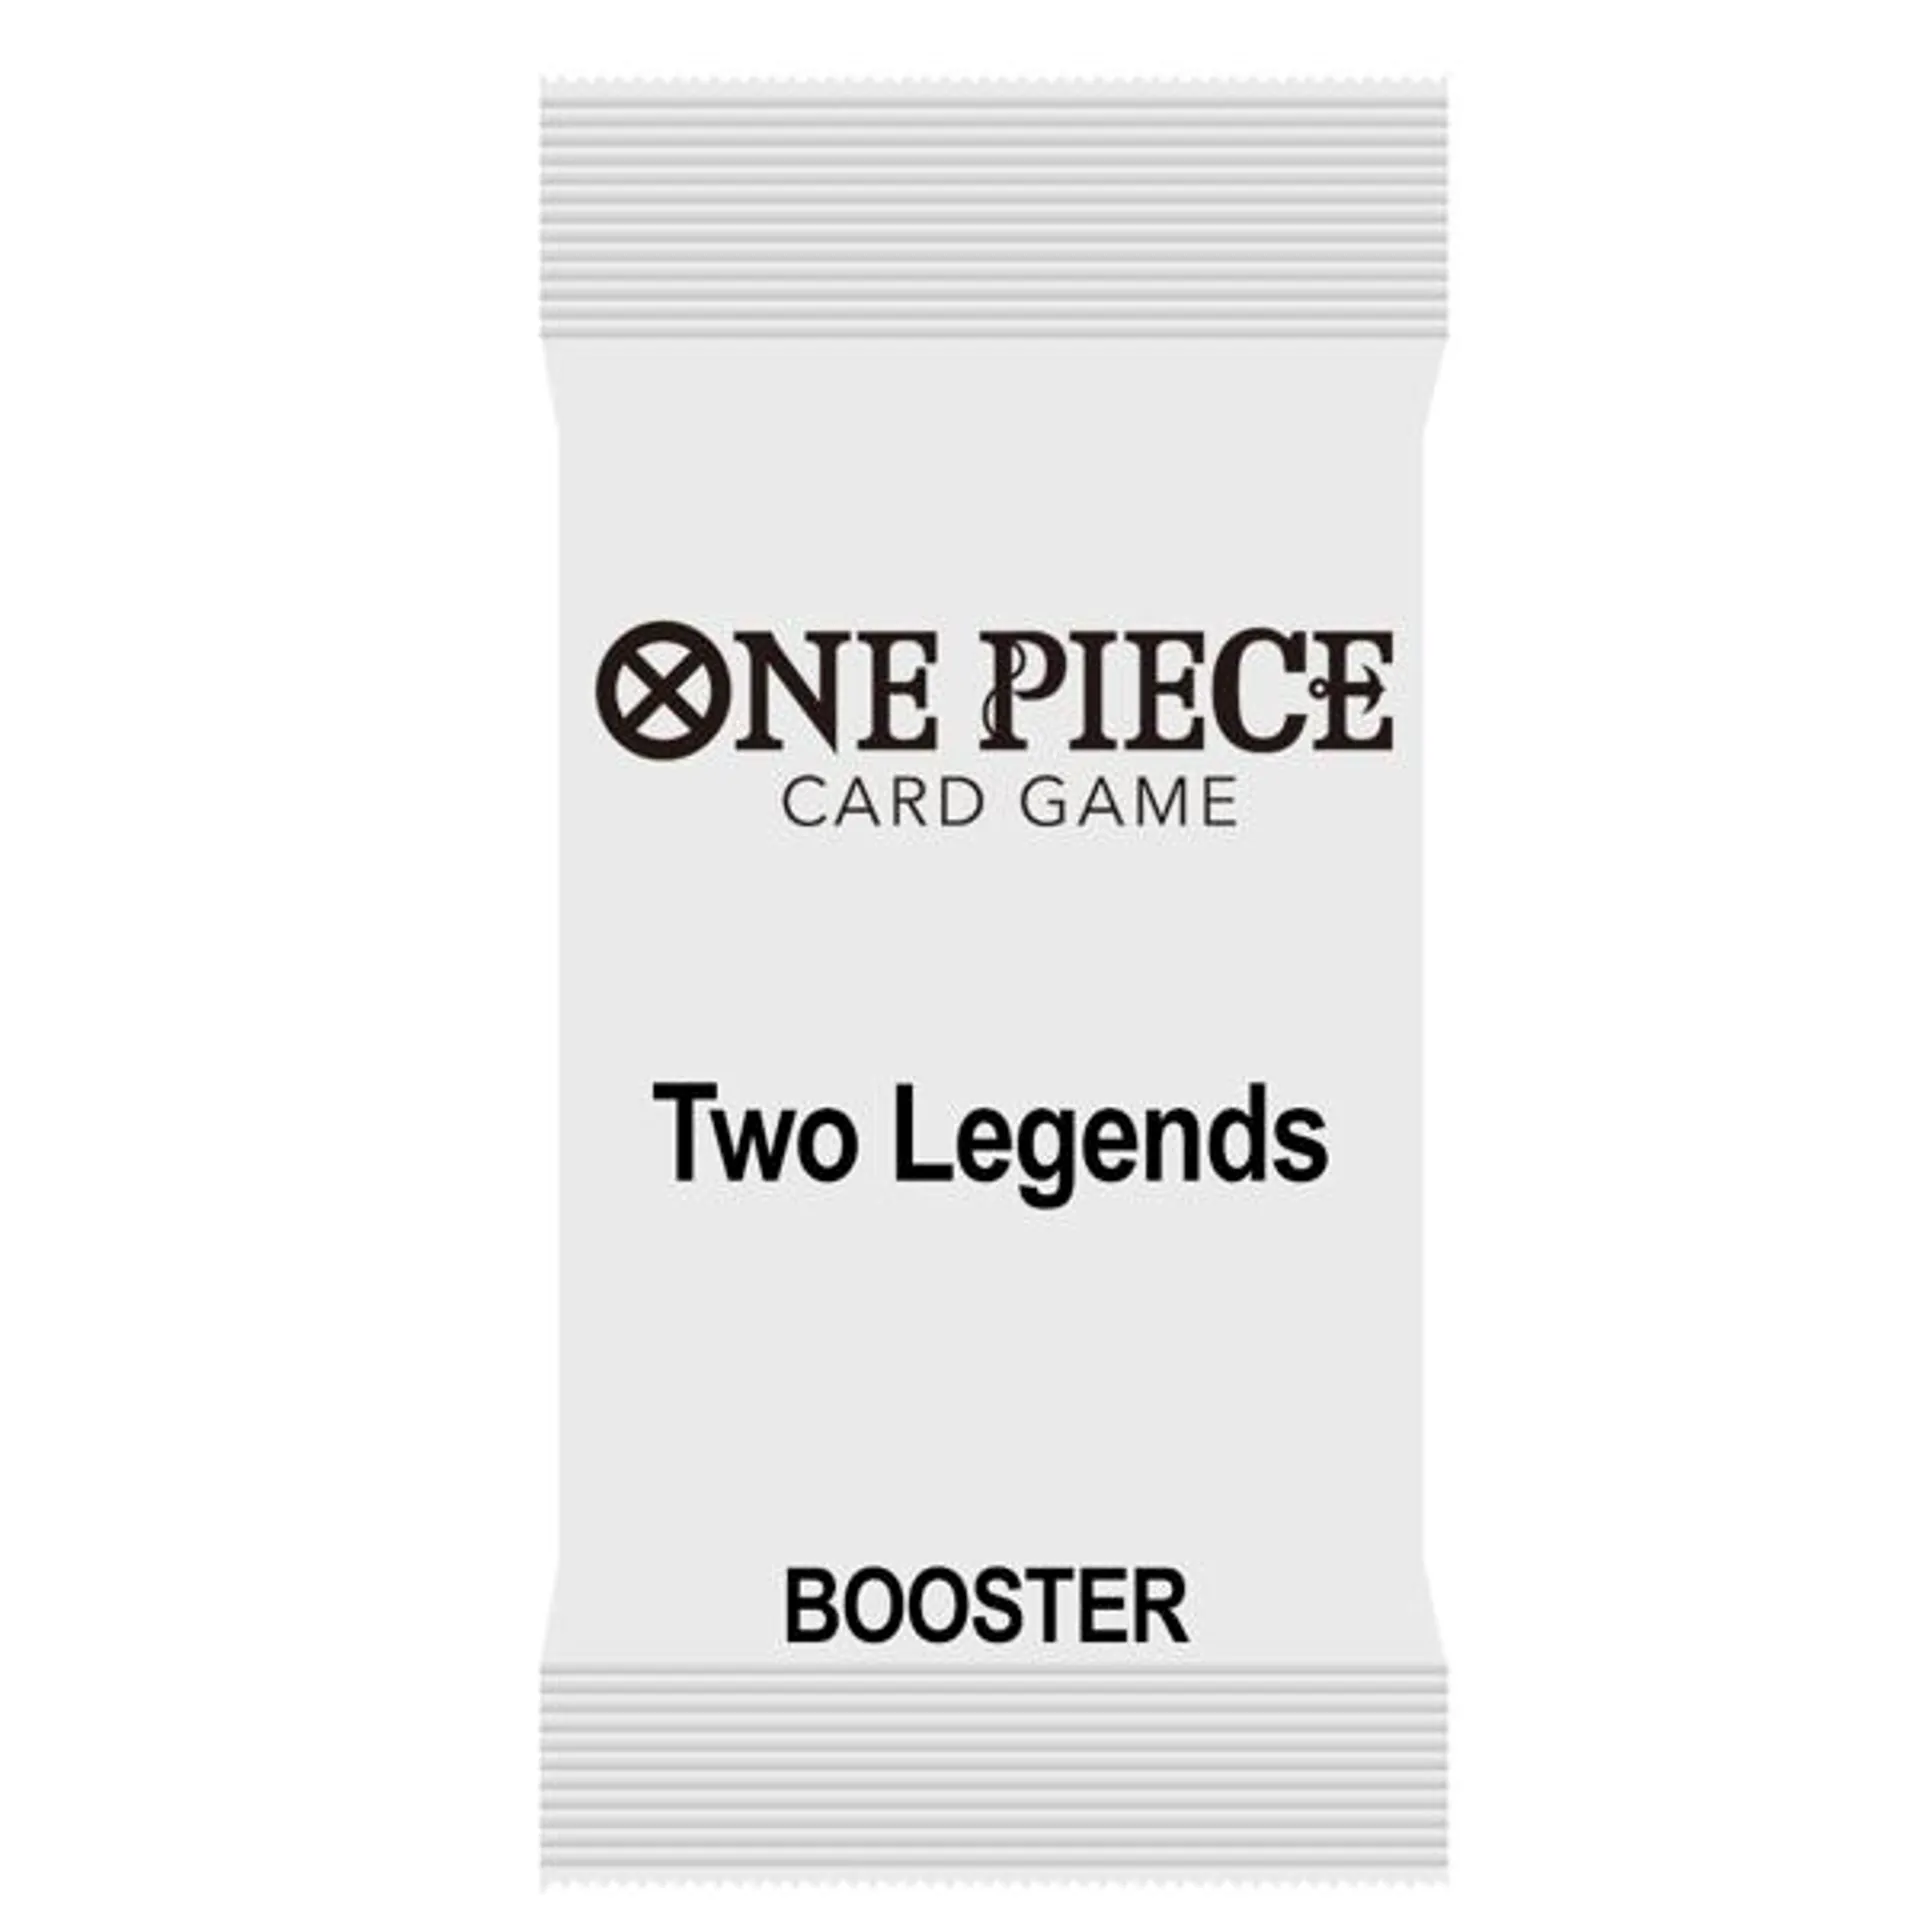 One Piece Card Game - Two Legends Booster Pack OP-08